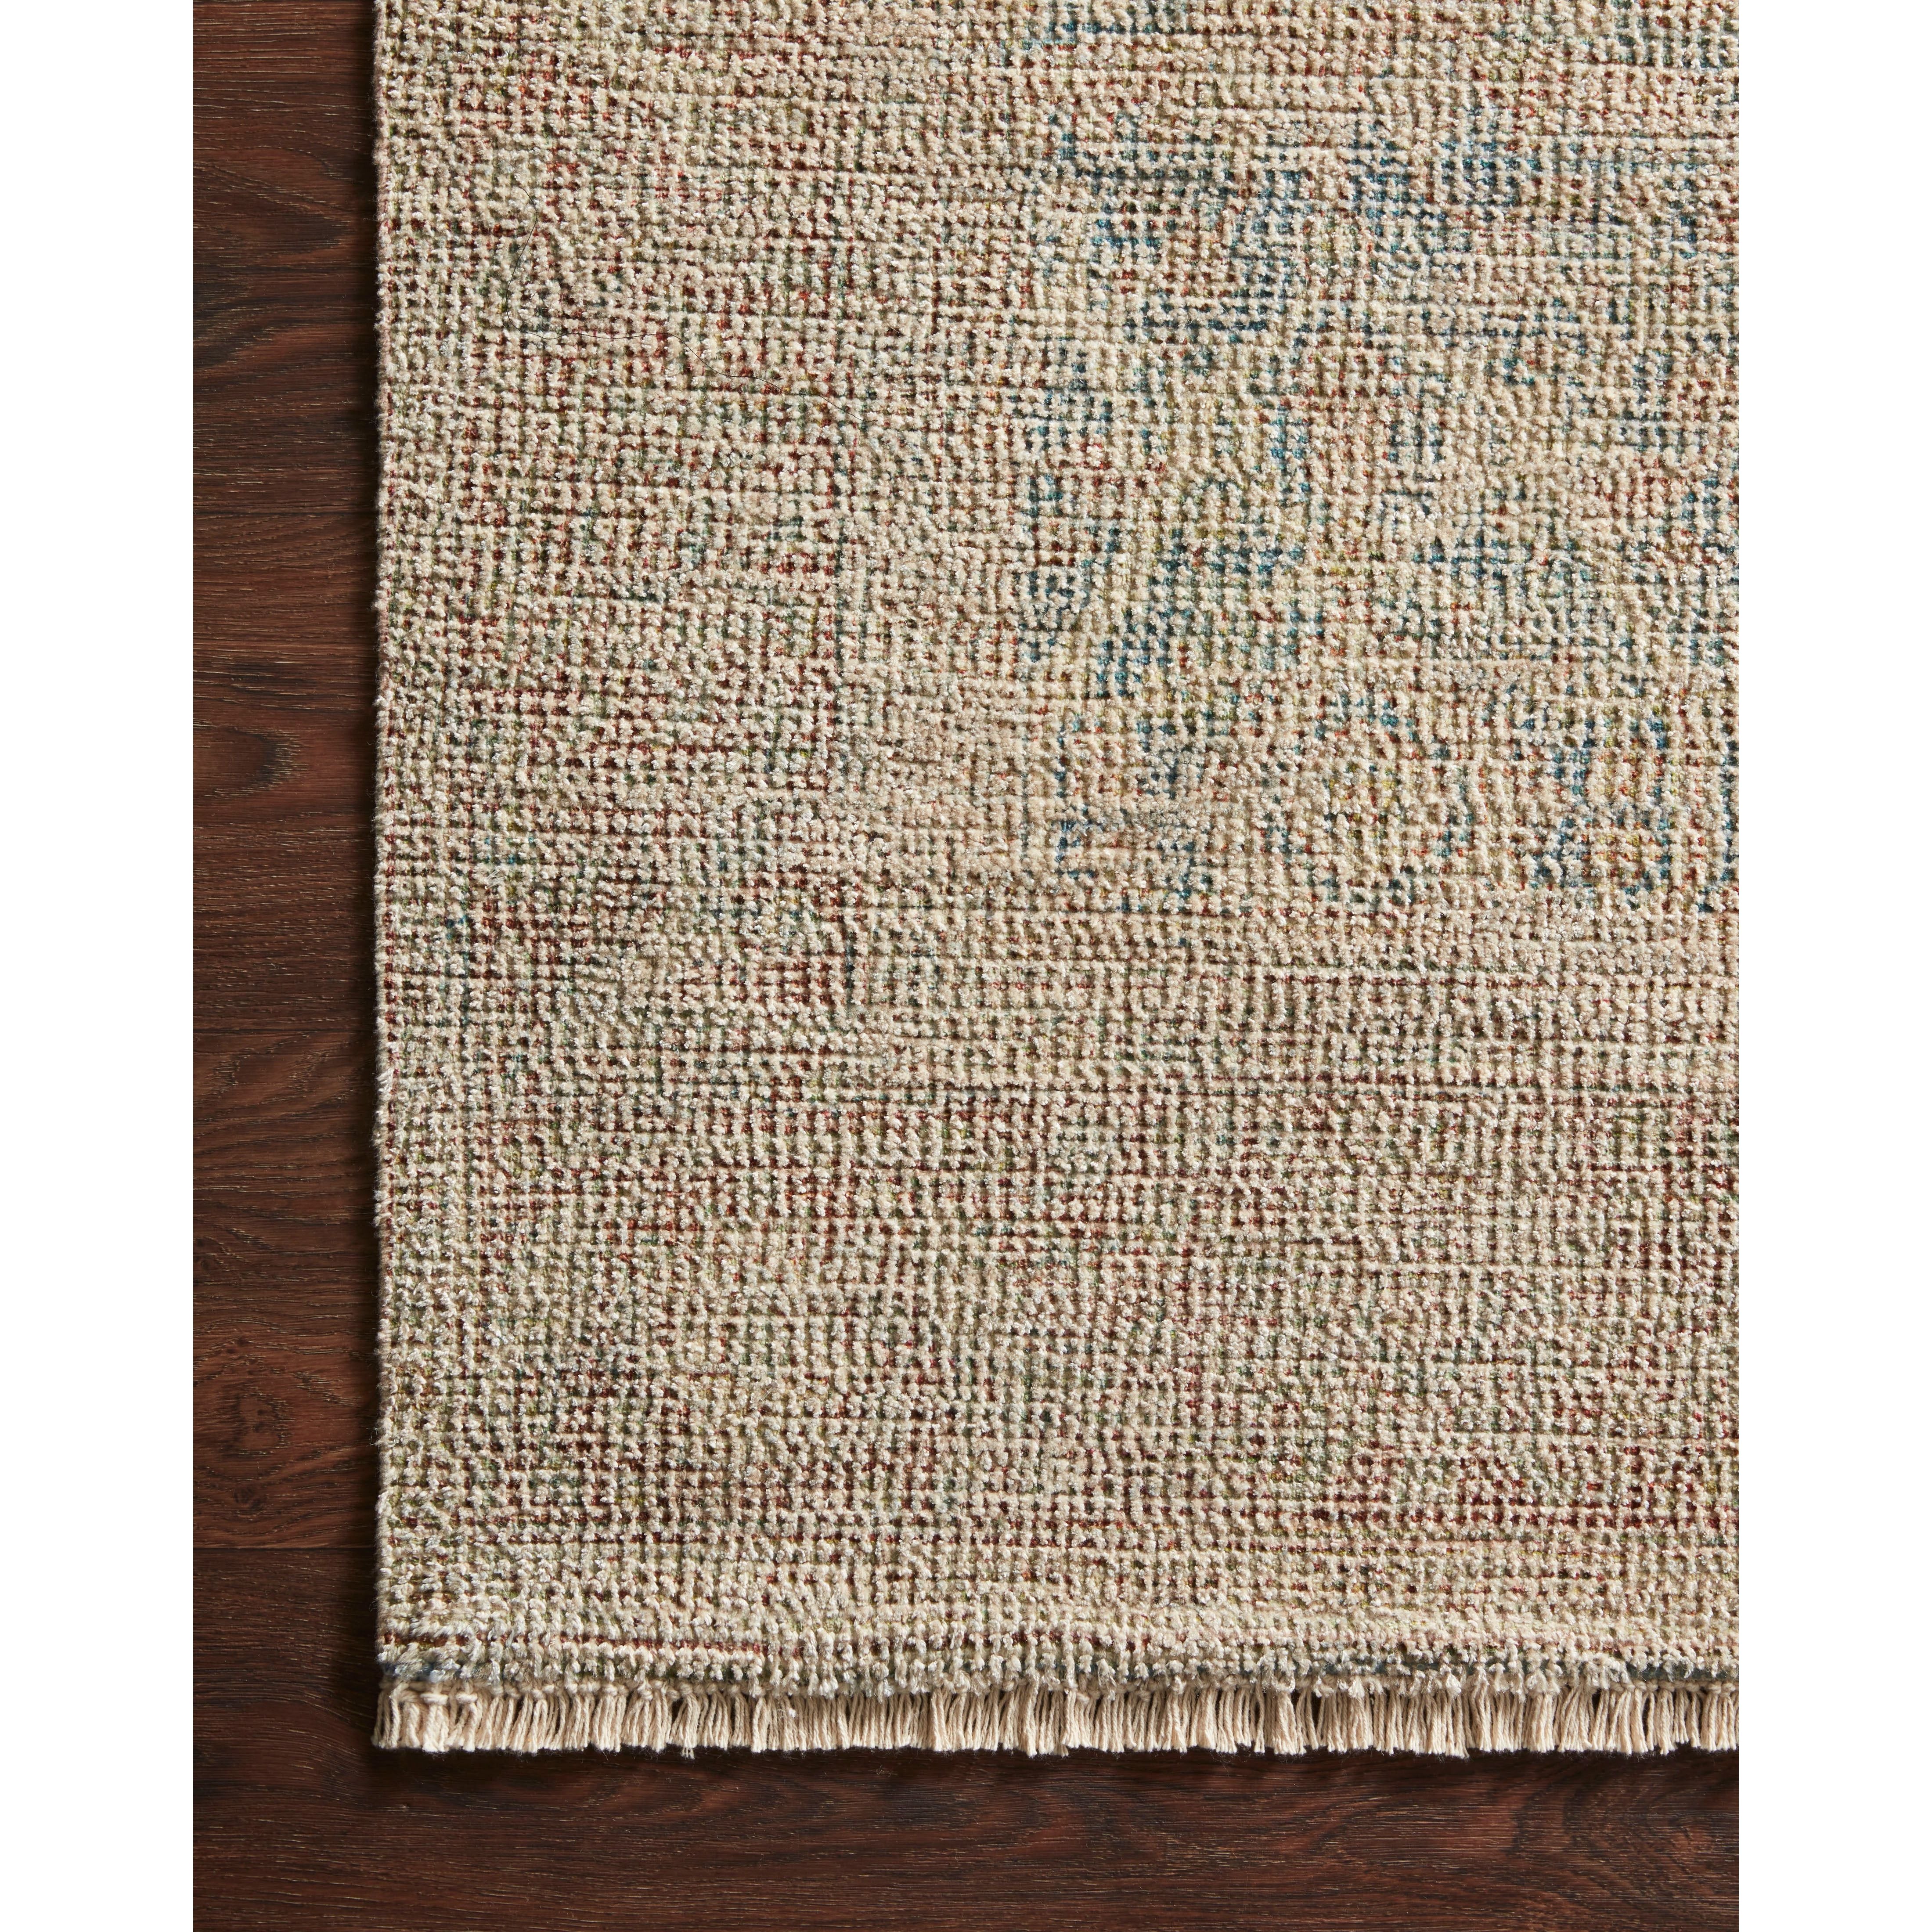 Hand-woven by skilled artisans, the Priya Denim / Rust Area Rug from Loloi offers beautiful tonal designs accentuated by a carefully curated color palette in red, orange, ivory, and blue. Delicate yet strong, Priya is blended with wool, and cotton, and more for an instant classic made for today's home.